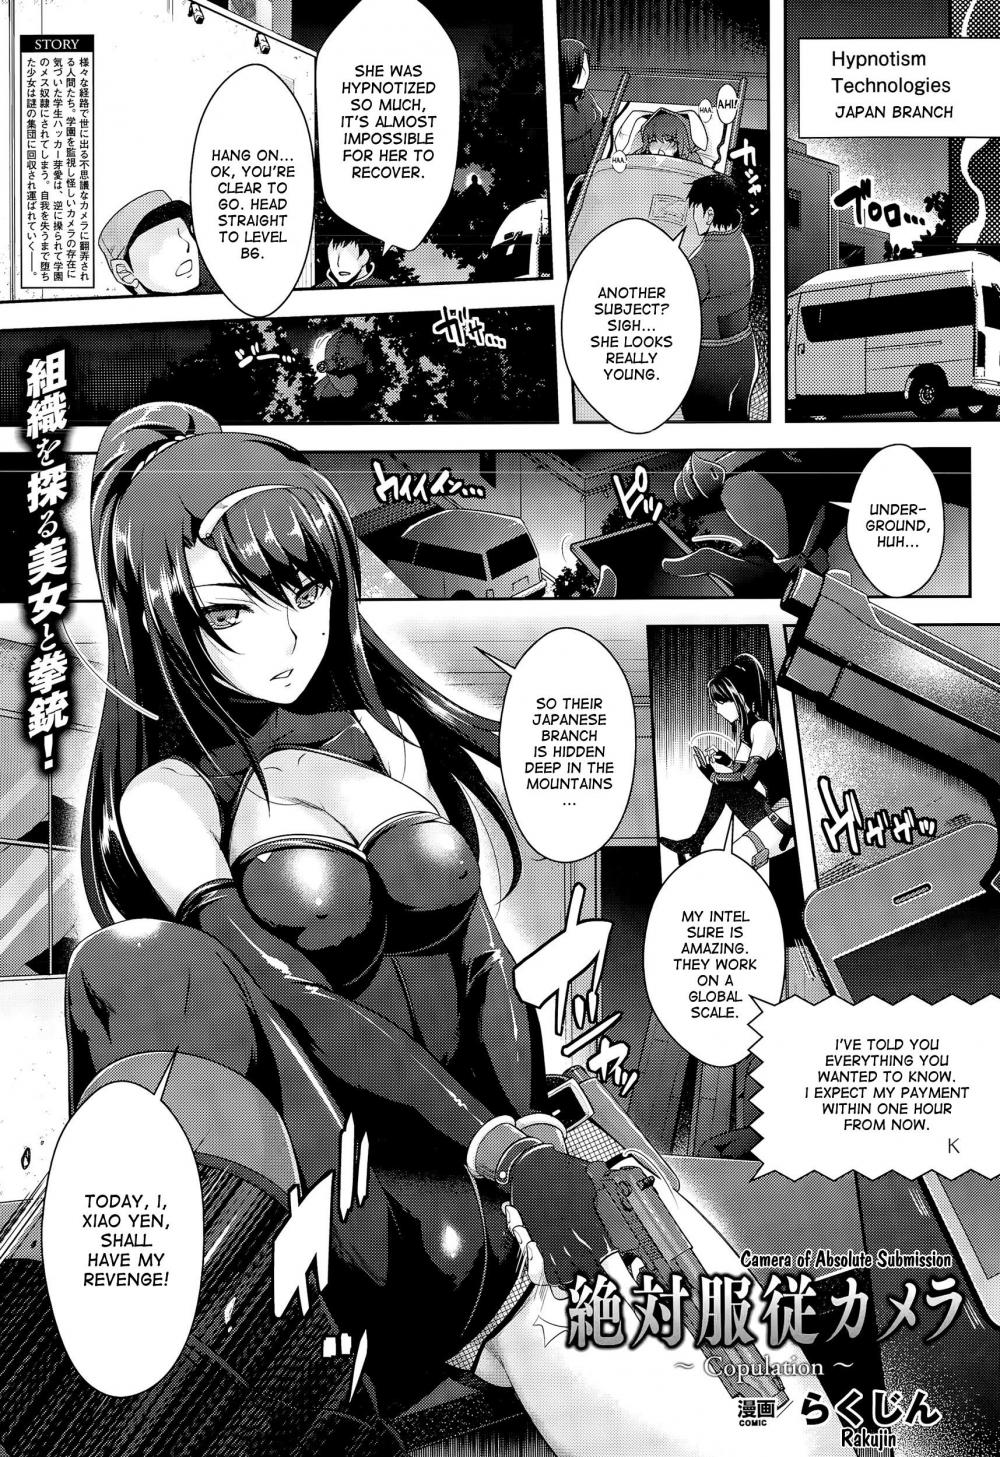 Hentai Manga Comic-Camera of Absolute Submission - Copulation-Read-1